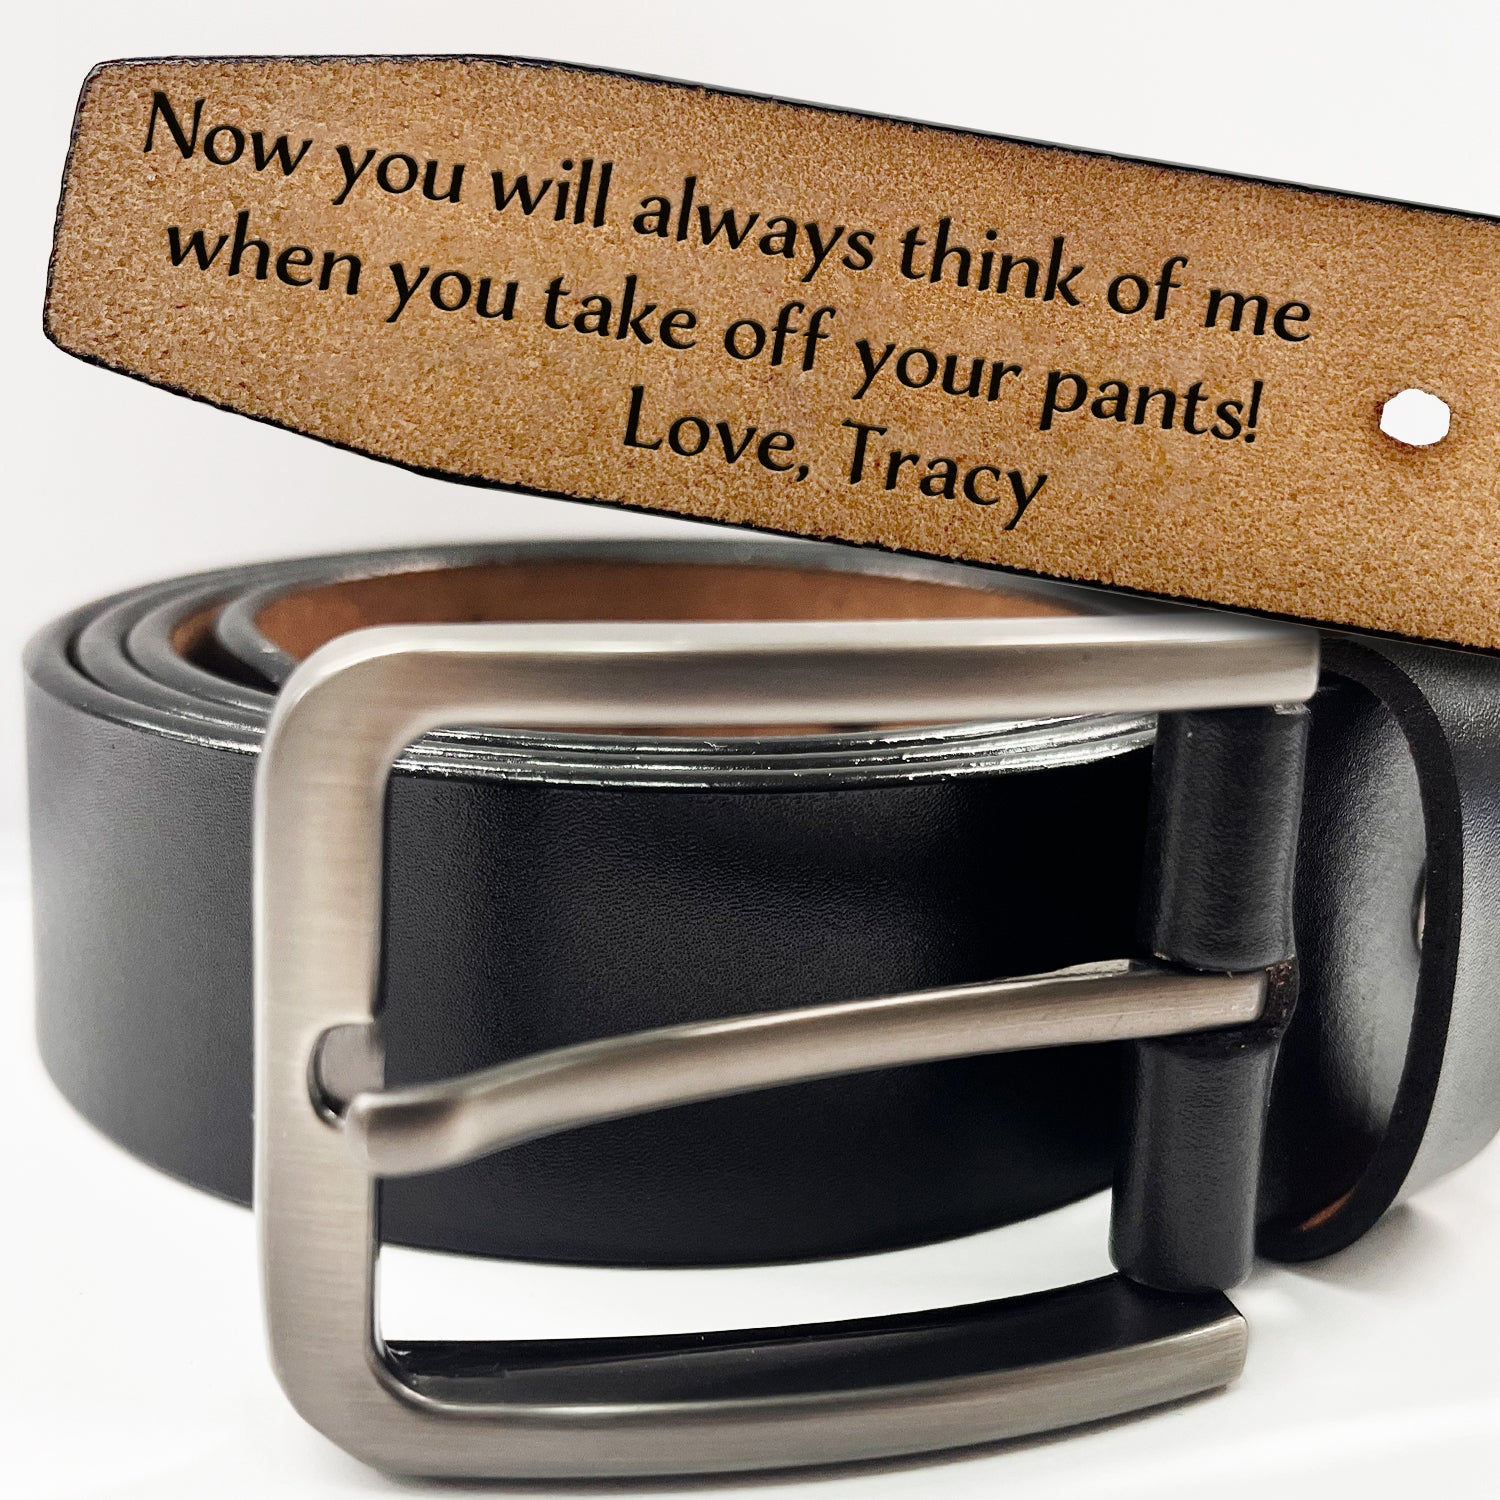 You Will Always Think Of Me - Gift For Husband, Boyfriend, Dad, Father, Couples - Personalized Engraved Leather Belt